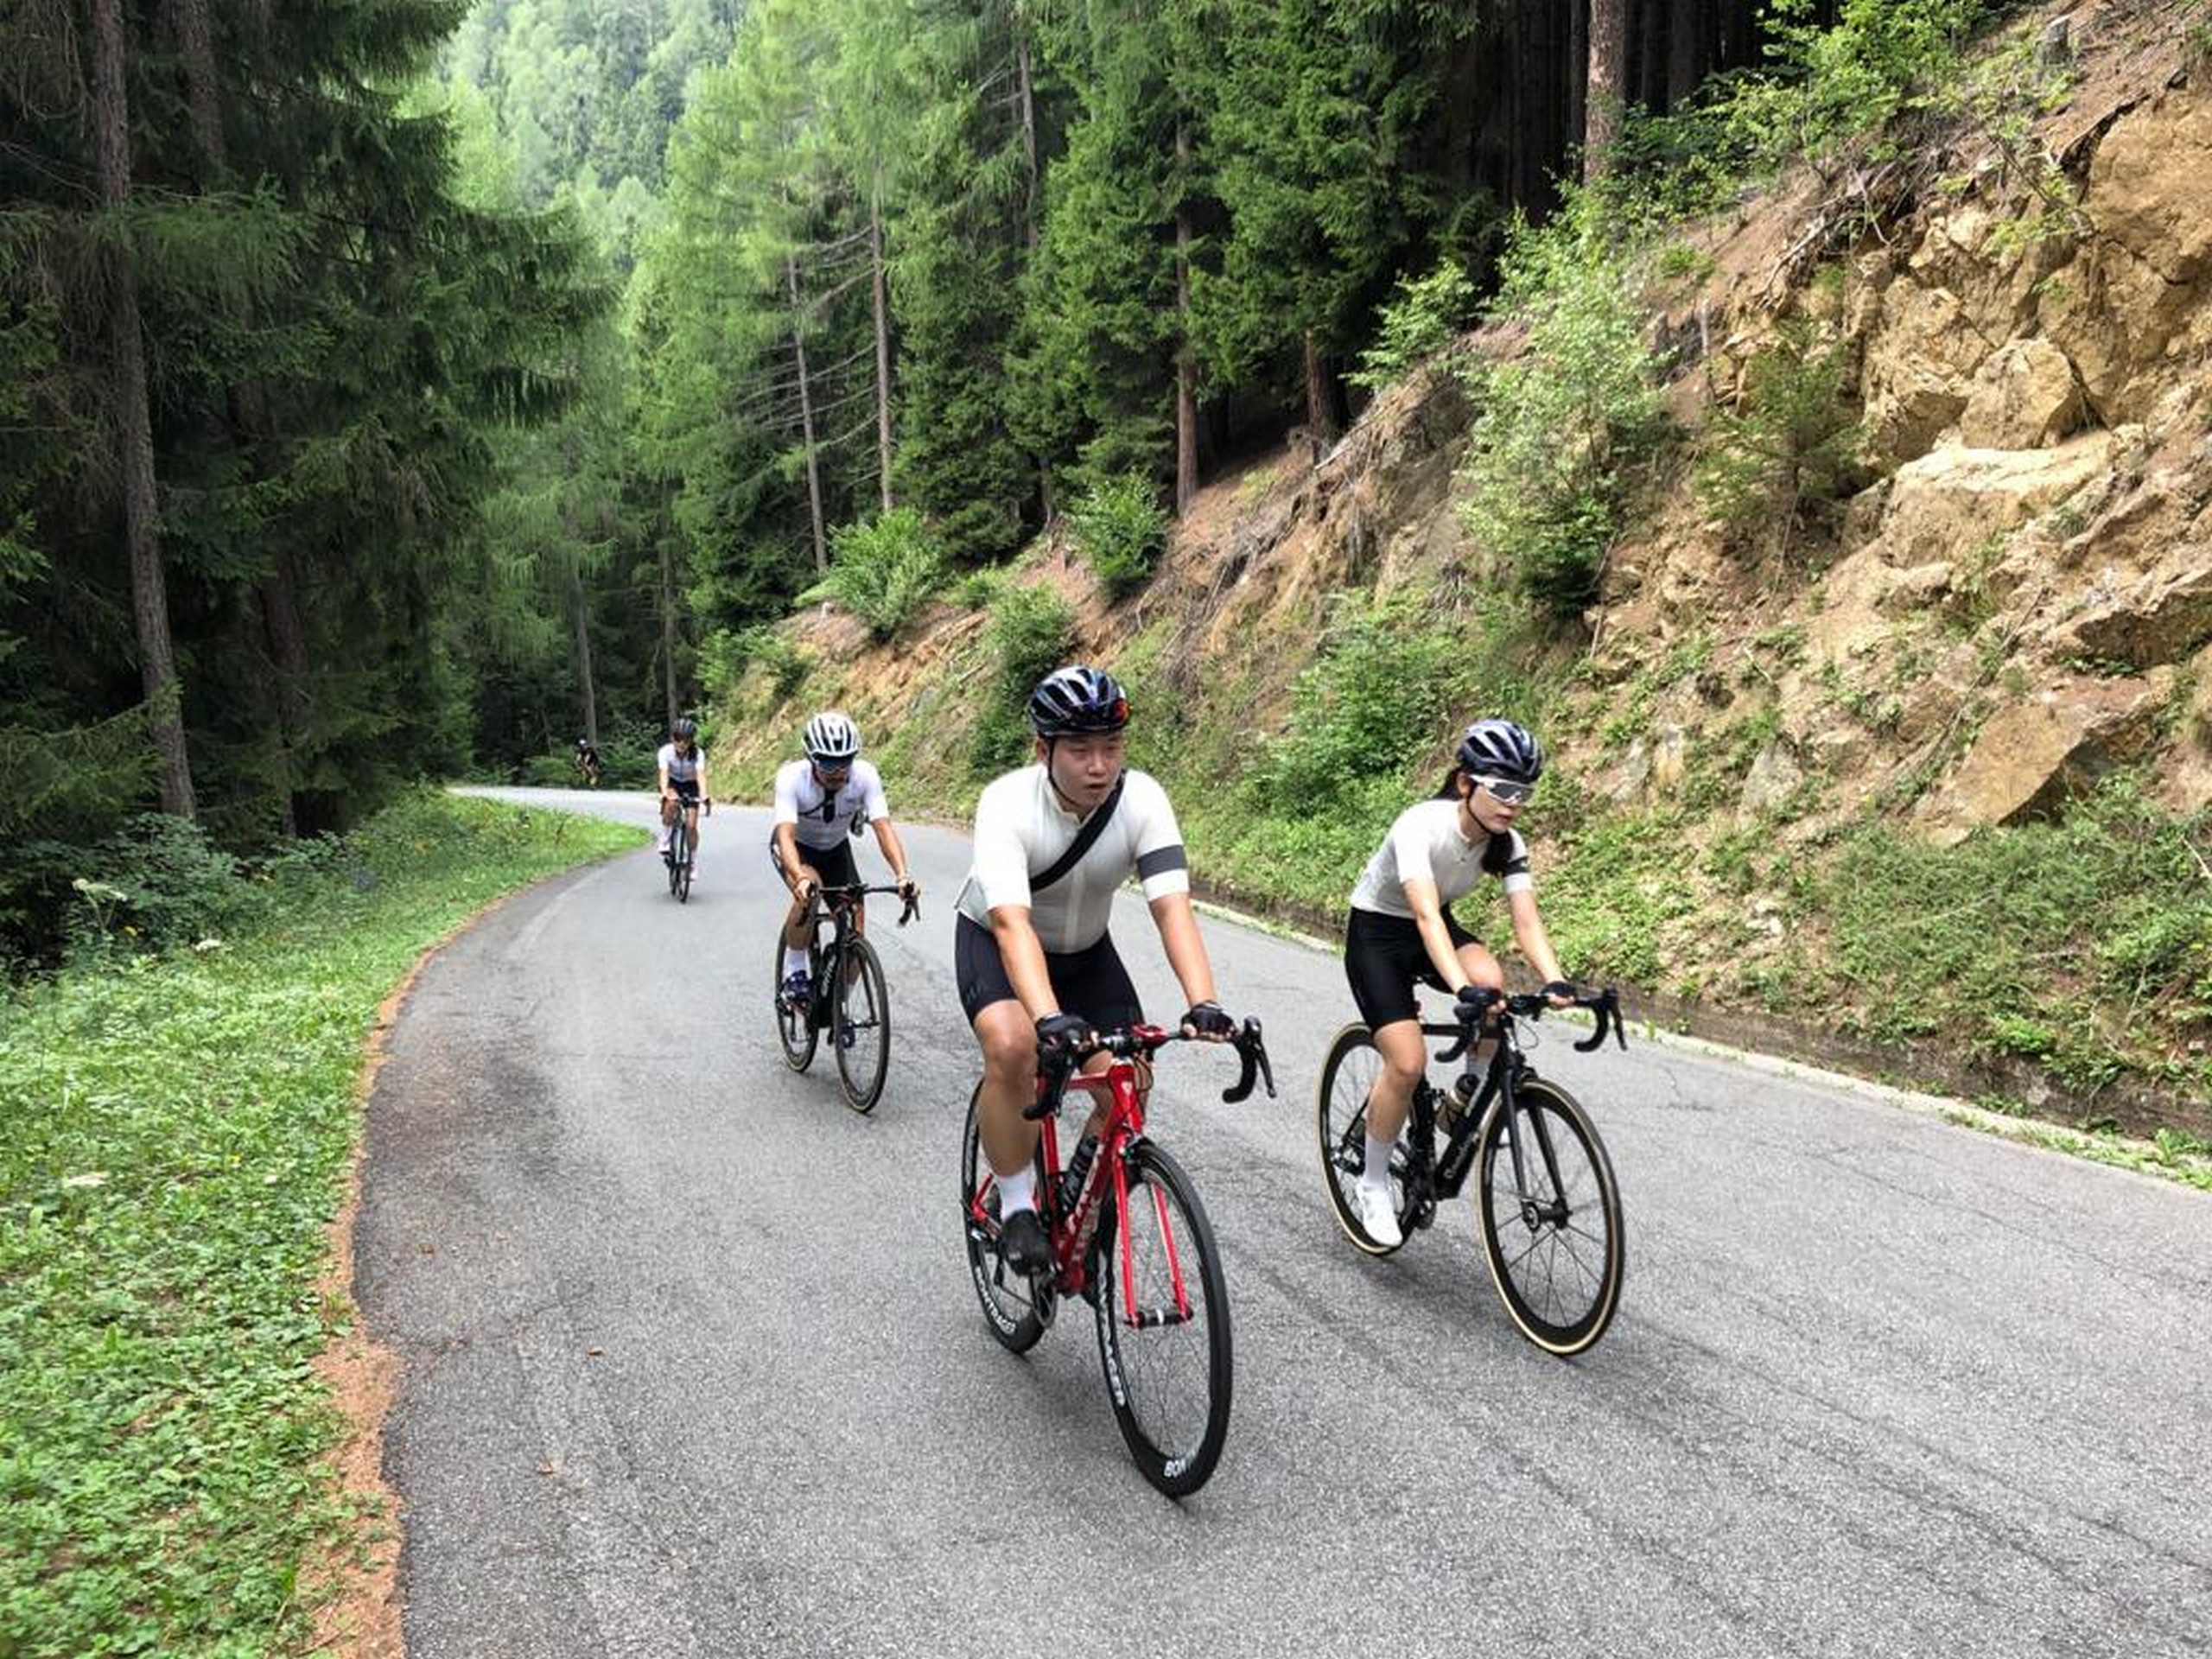 Group or road bikers in Italy